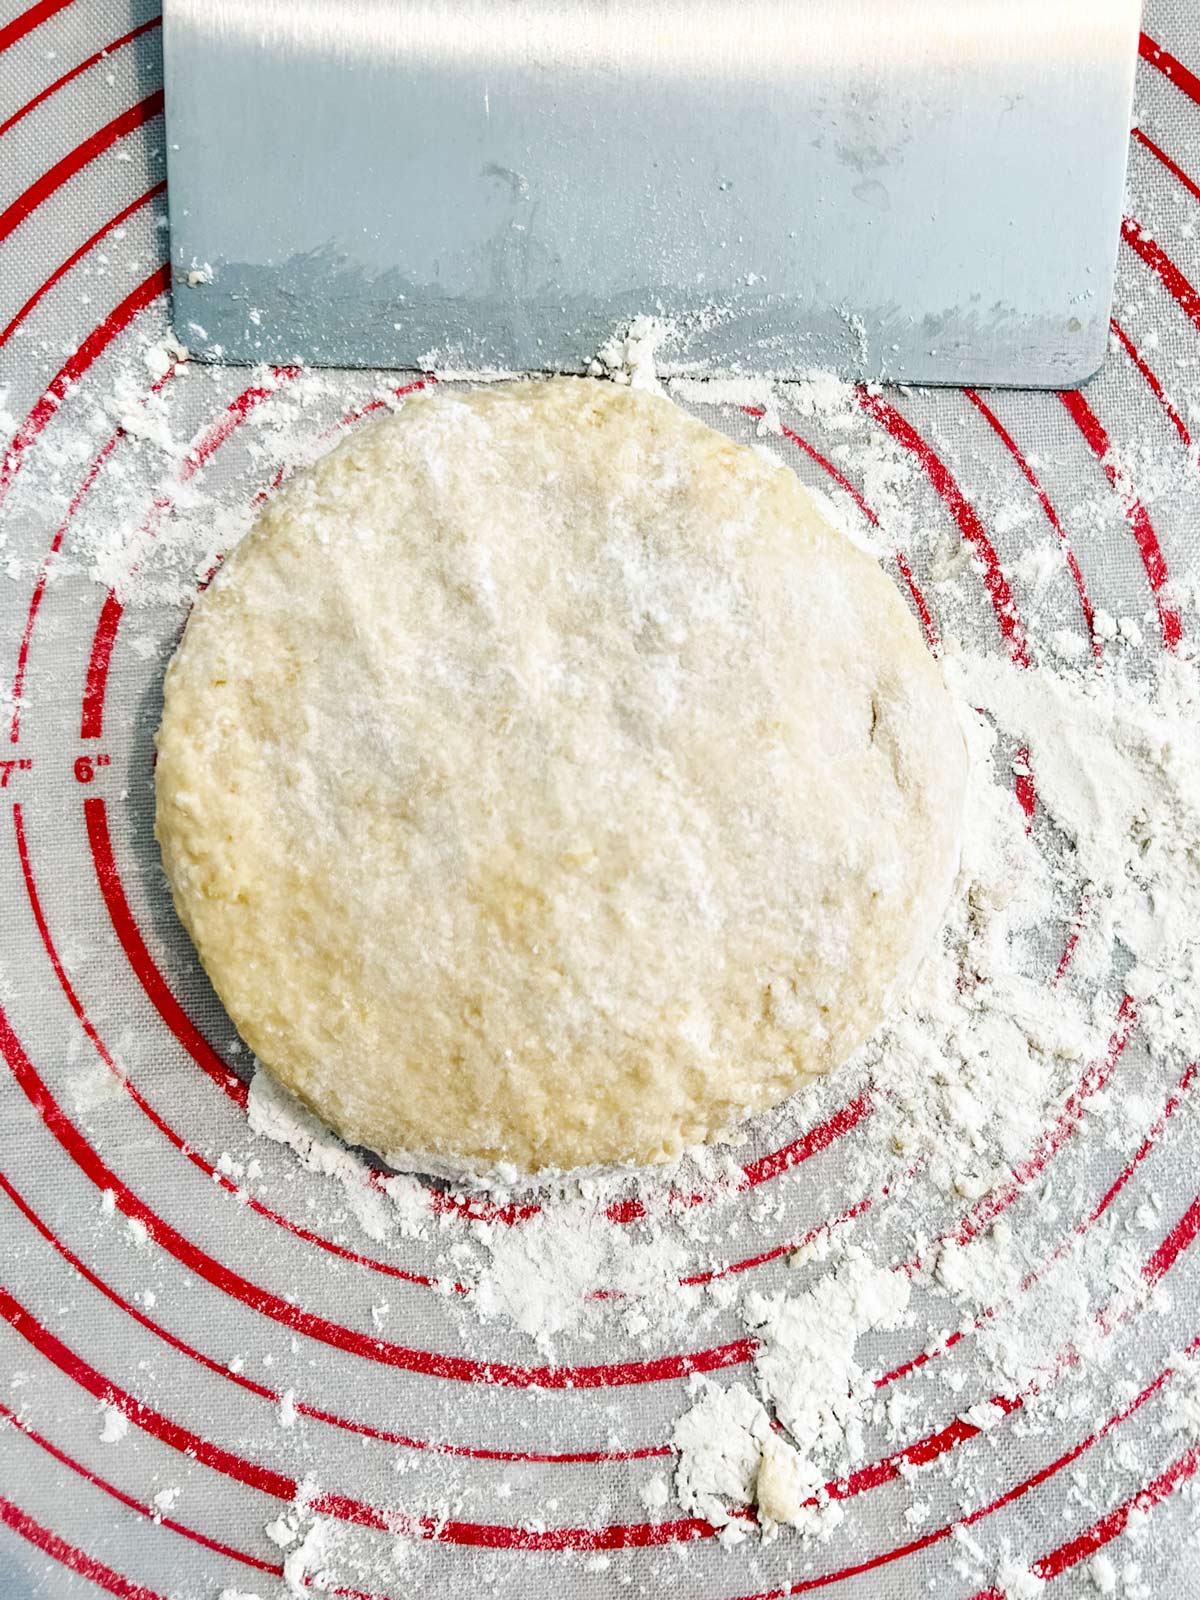 Brioche dough on a pastry mat sprinkled with flour.